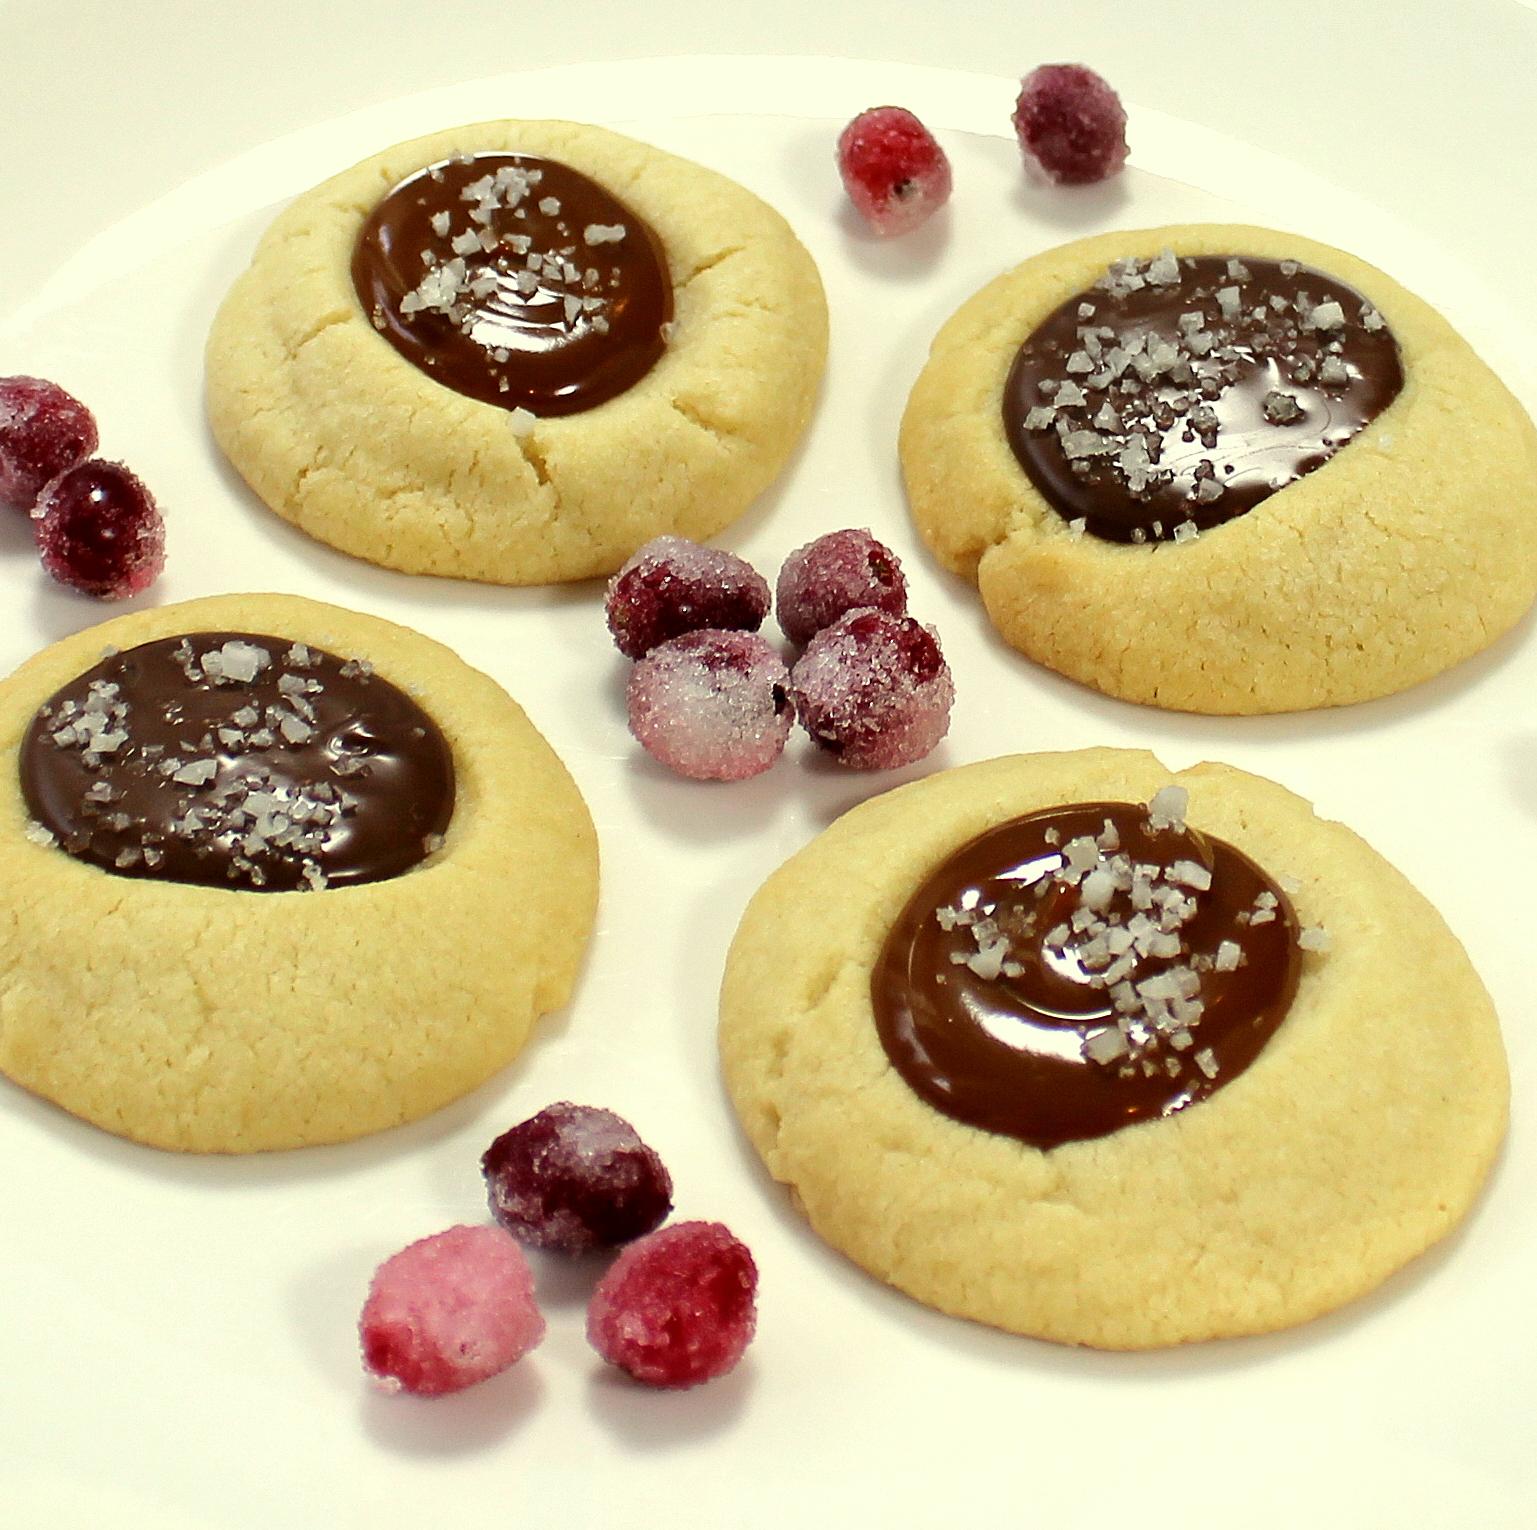  Sweet and simple: dulce de leche and Nutella thumbprints.